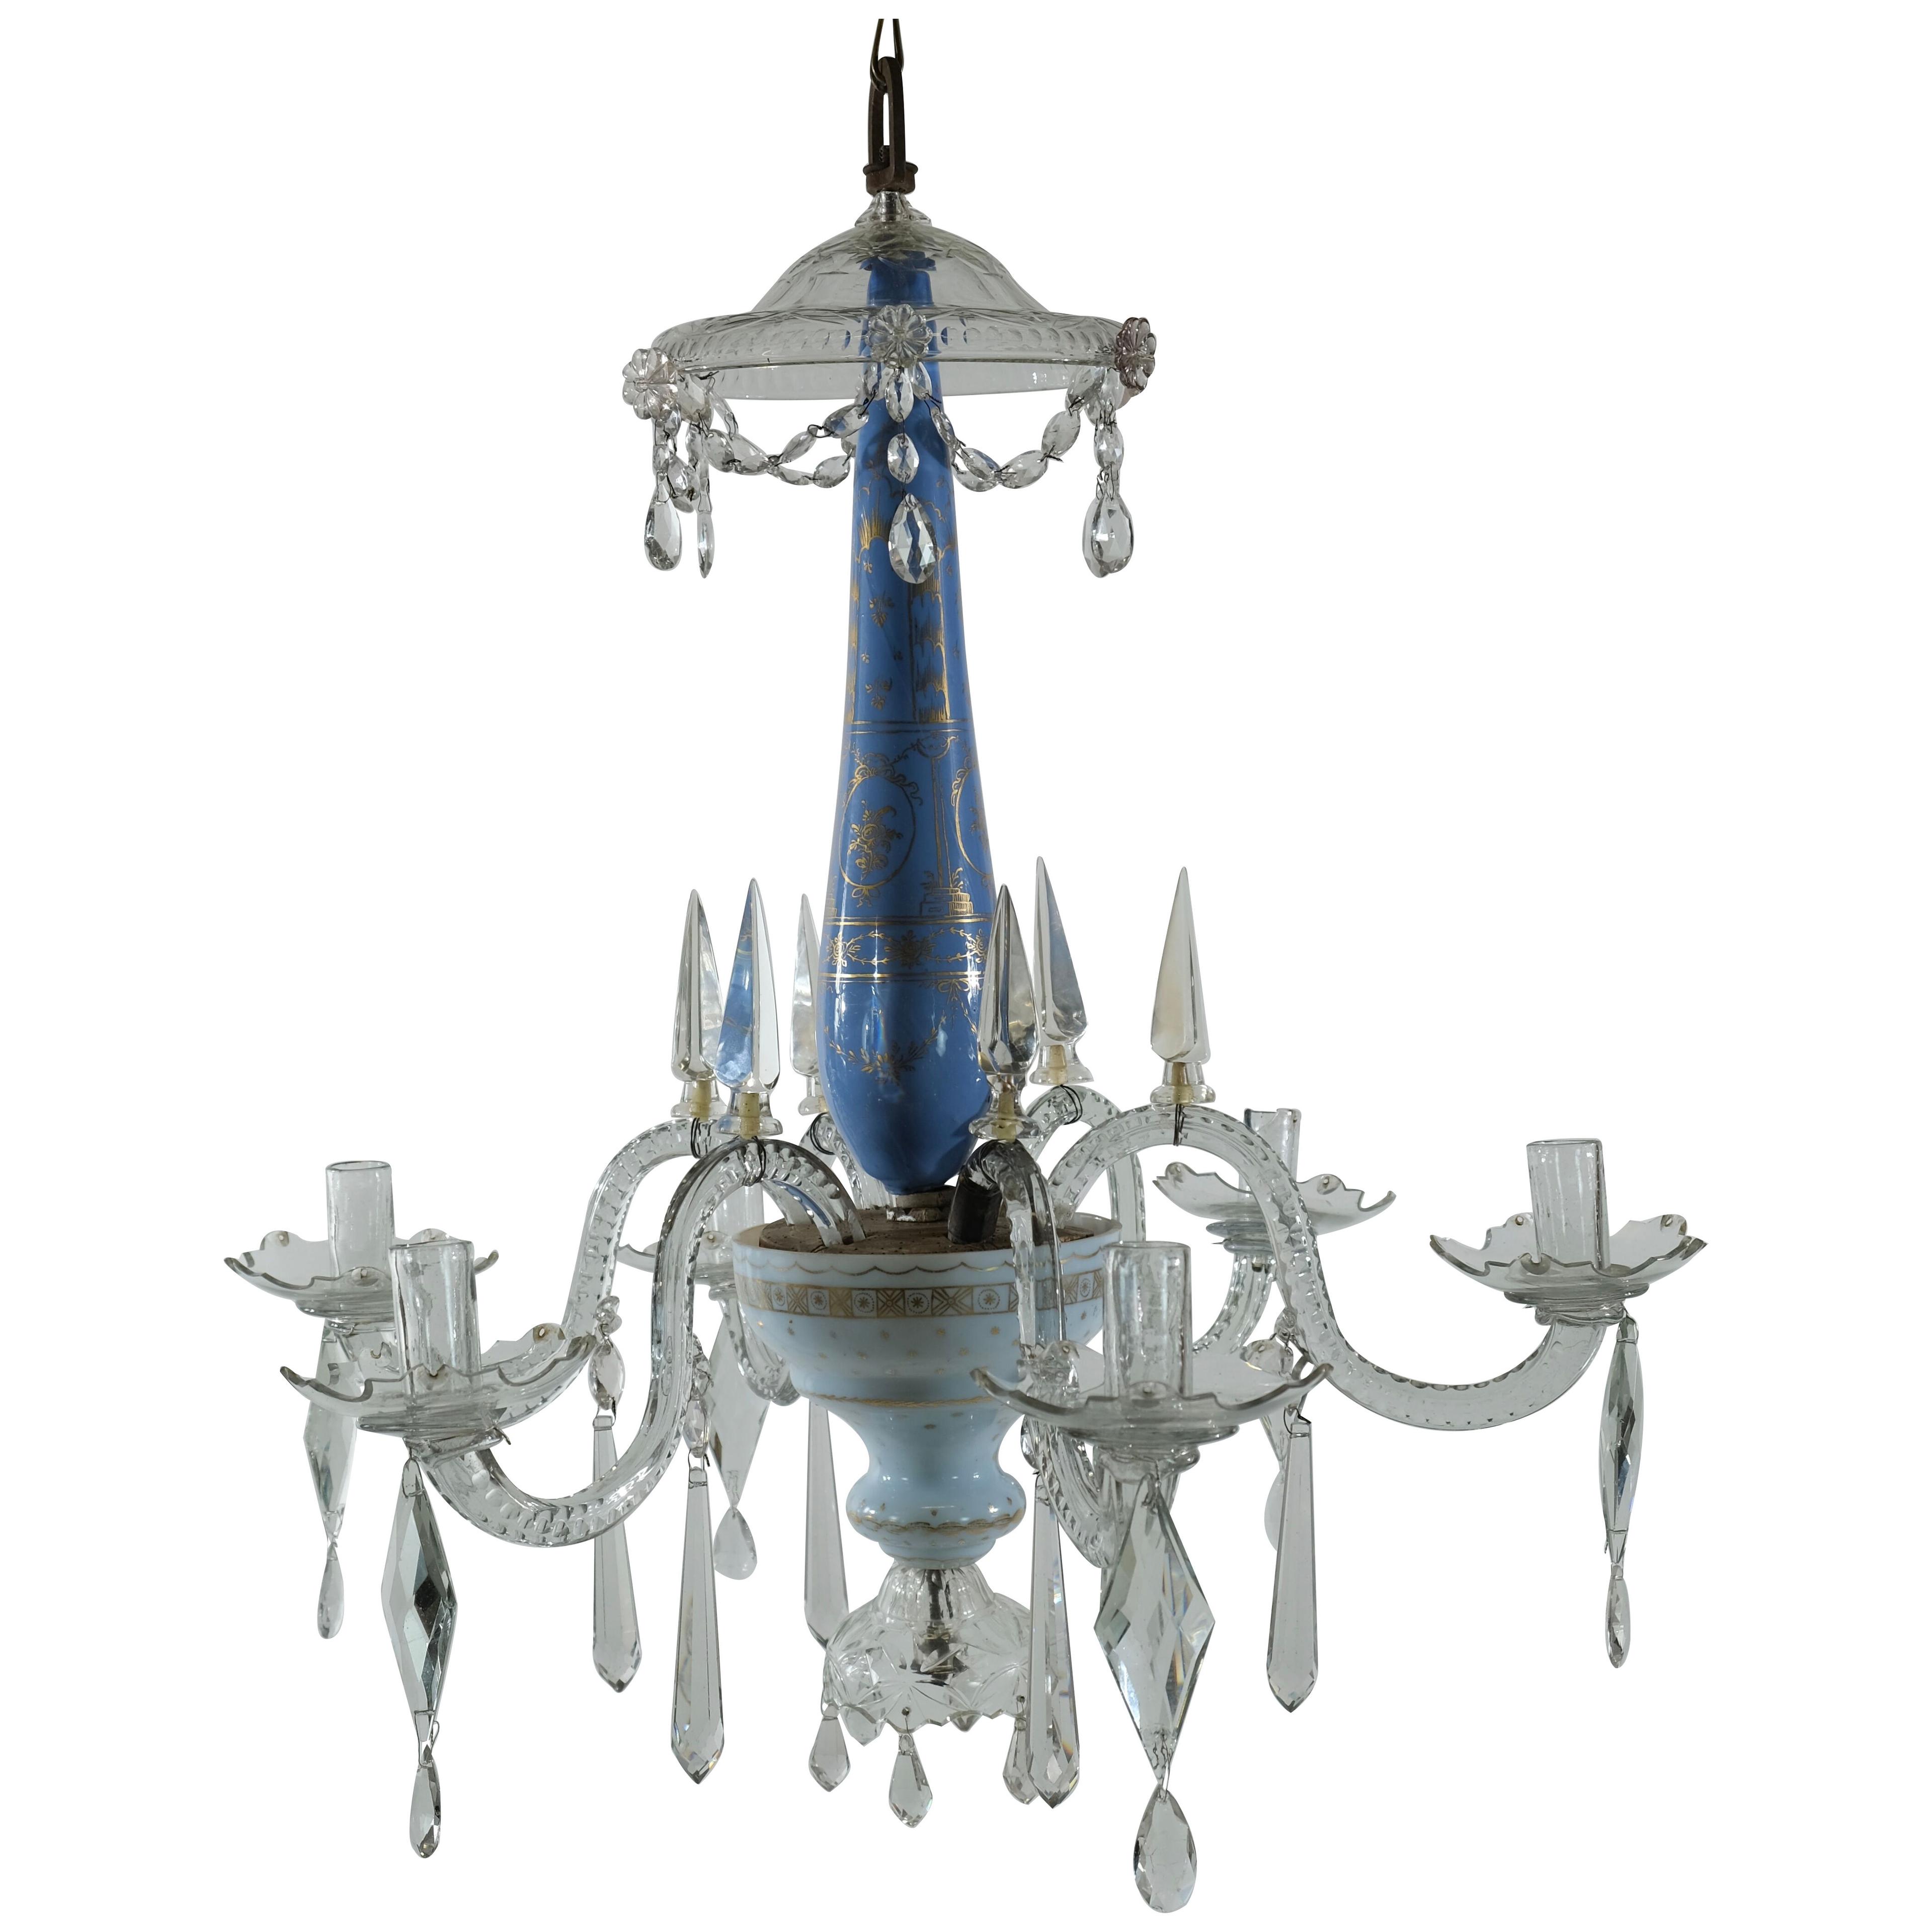 A SMALL RUSSIAN CHANDELIER MADE AROUND 1780